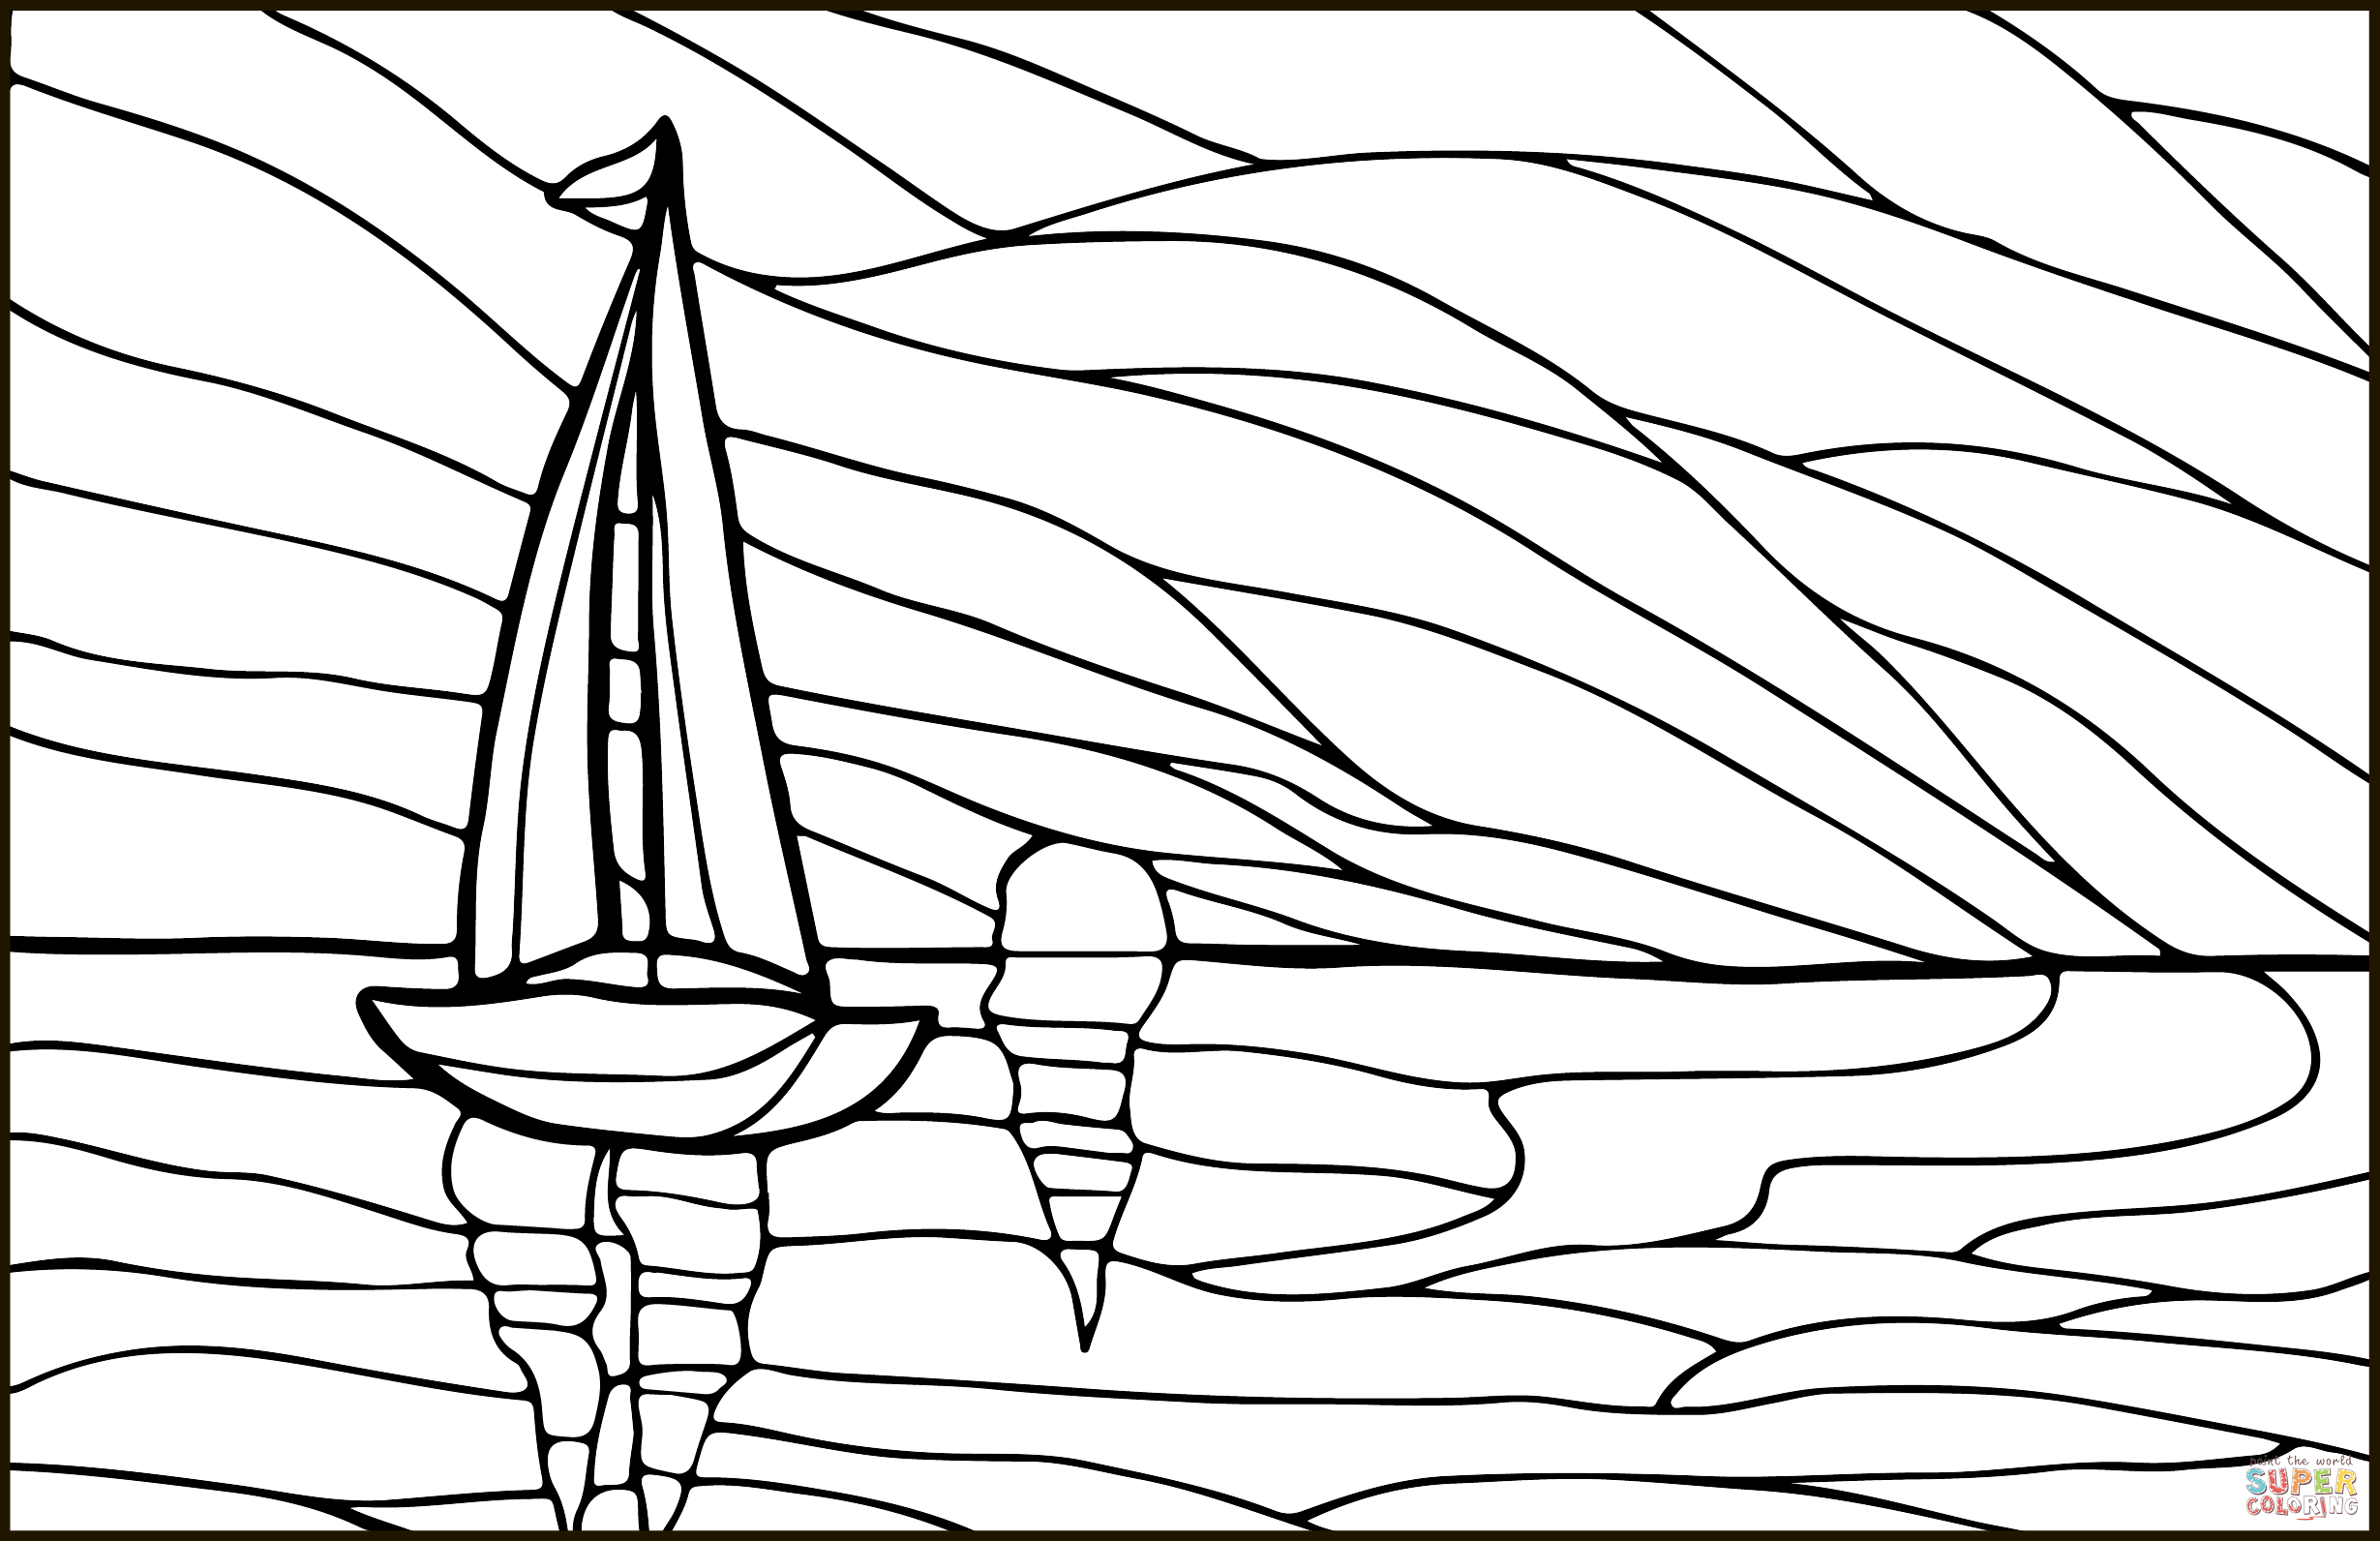 Sunrise stained glass coloring page free printable coloring pages